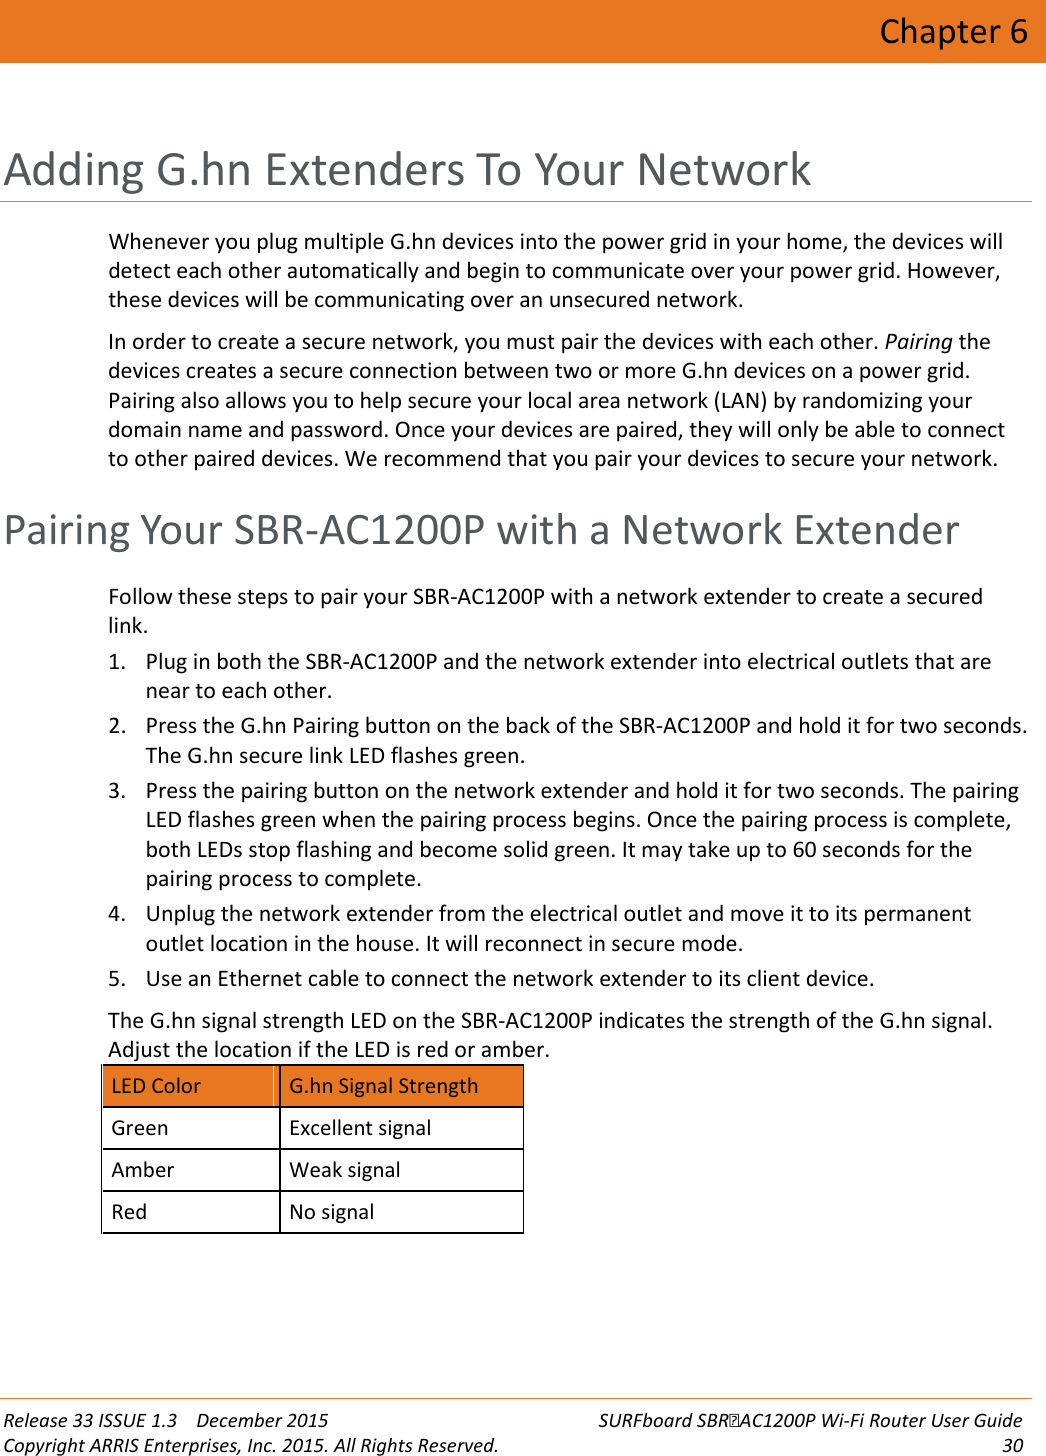  Release 33 ISSUE 1.3    December 2015 SURFboard SBRAC1200P Wi-Fi Router User Guide Copyright ARRIS Enterprises, Inc. 2015. All Rights Reserved. 30  Chapter 6 Adding G.hn Extenders To Your Network Whenever you plug multiple G.hn devices into the power grid in your home, the devices will detect each other automatically and begin to communicate over your power grid. However, these devices will be communicating over an unsecured network. In order to create a secure network, you must pair the devices with each other. Pairing the devices creates a secure connection between two or more G.hn devices on a power grid. Pairing also allows you to help secure your local area network (LAN) by randomizing your domain name and password. Once your devices are paired, they will only be able to connect to other paired devices. We recommend that you pair your devices to secure your network.   Pairing Your SBR-AC1200P with a Network Extender Follow these steps to pair your SBR-AC1200P with a network extender to create a secured link. 1. Plug in both the SBR-AC1200P and the network extender into electrical outlets that are near to each other. 2. Press the G.hn Pairing button on the back of the SBR-AC1200P and hold it for two seconds. The G.hn secure link LED flashes green. 3. Press the pairing button on the network extender and hold it for two seconds. The pairing LED flashes green when the pairing process begins. Once the pairing process is complete, both LEDs stop flashing and become solid green. It may take up to 60 seconds for the pairing process to complete. 4. Unplug the network extender from the electrical outlet and move it to its permanent outlet location in the house. It will reconnect in secure mode. 5. Use an Ethernet cable to connect the network extender to its client device. The G.hn signal strength LED on the SBR-AC1200P indicates the strength of the G.hn signal. Adjust the location if the LED is red or amber. LED Color G.hn Signal Strength Green Excellent signal Amber Weak signal Red No signal    